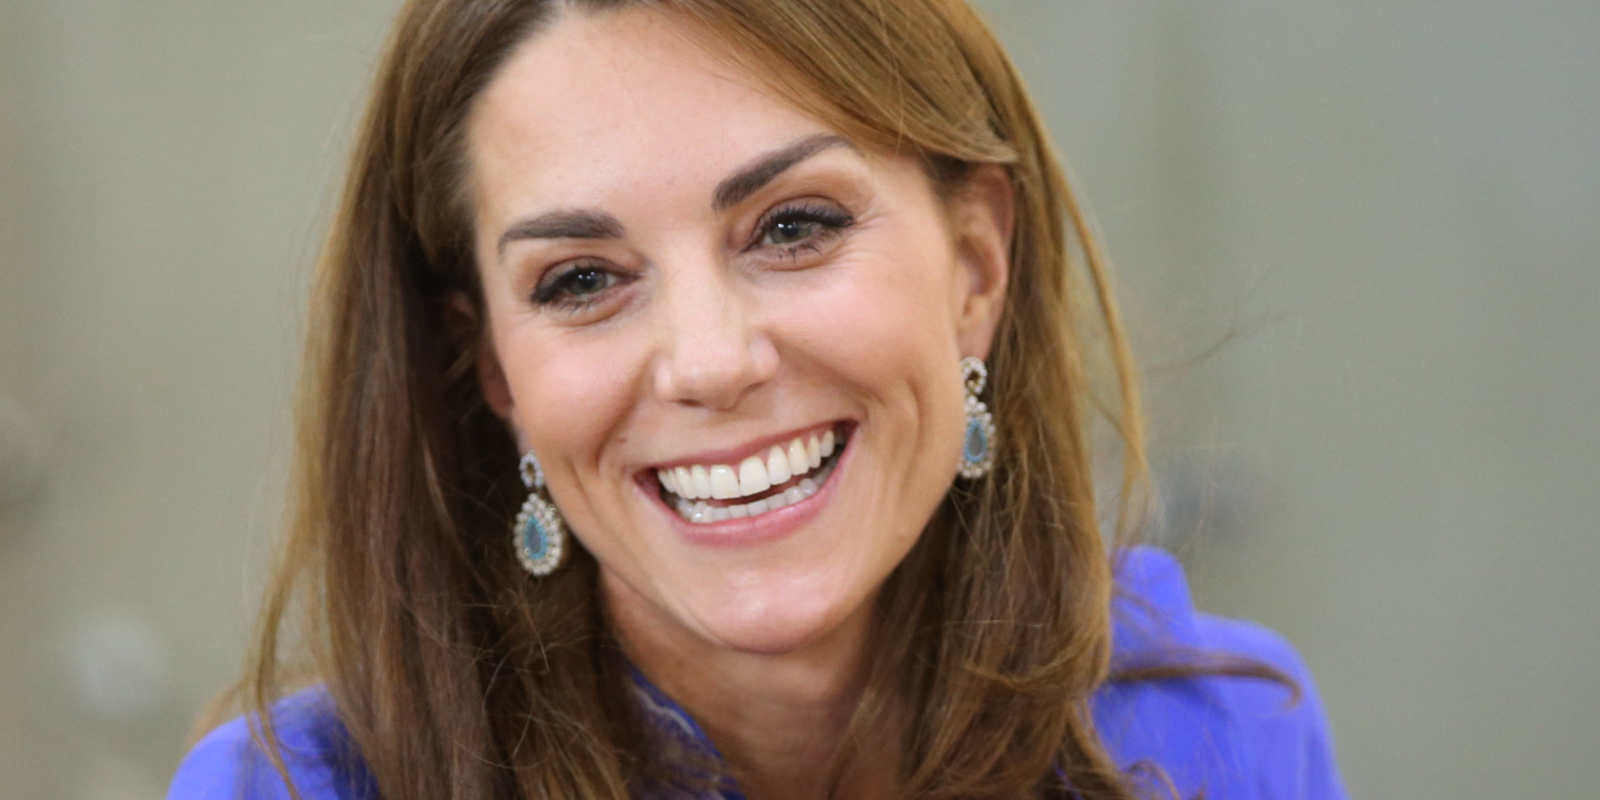 Kate Middleton visits a school on October 15, 2019 in Islamabad, Pakistan.